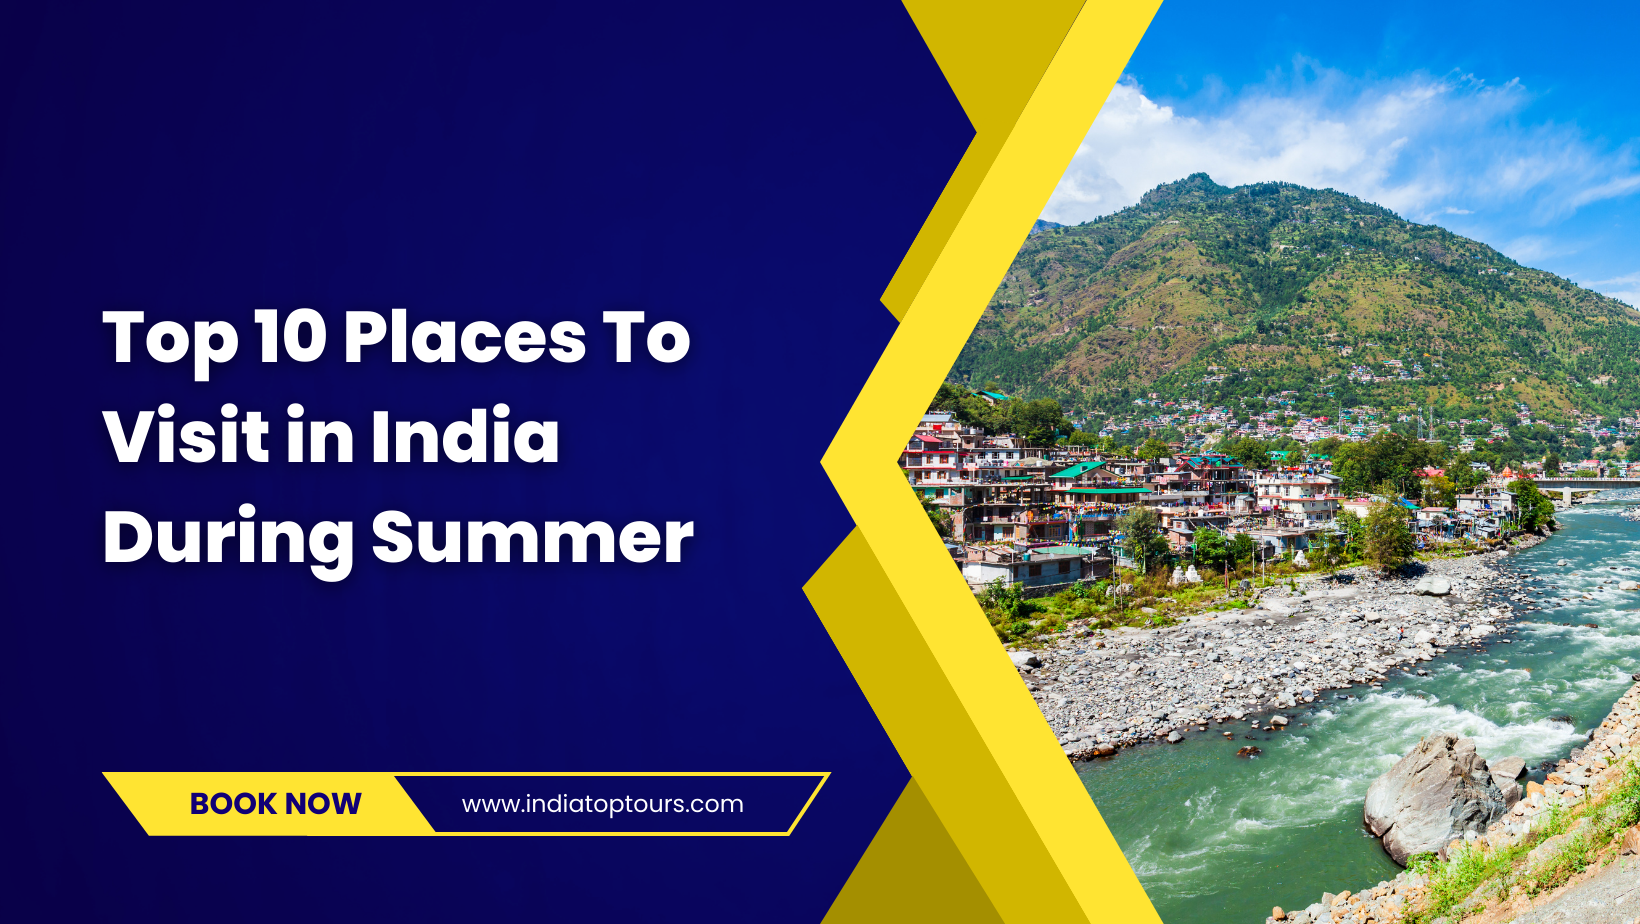 Top 10 Places To Visit in India During Summer